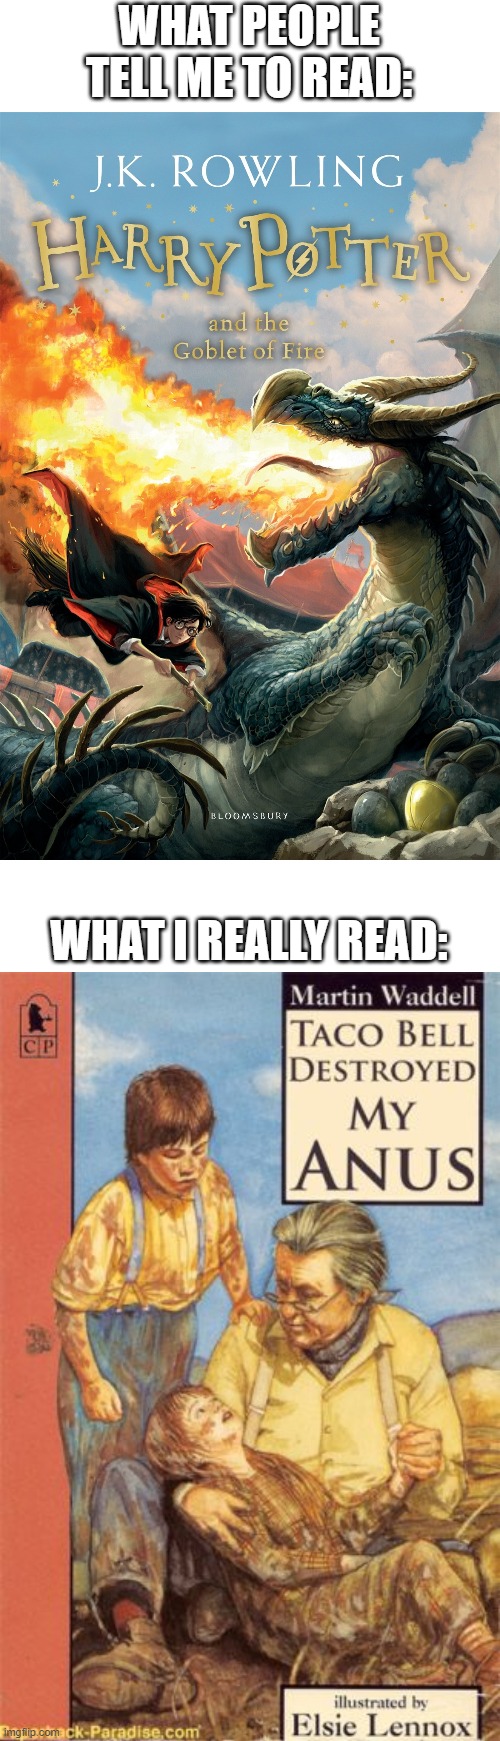 I'm never eating from taco bell again | WHAT PEOPLE TELL ME TO READ:; WHAT I REALLY READ: | image tagged in memes,books,tacobell | made w/ Imgflip meme maker